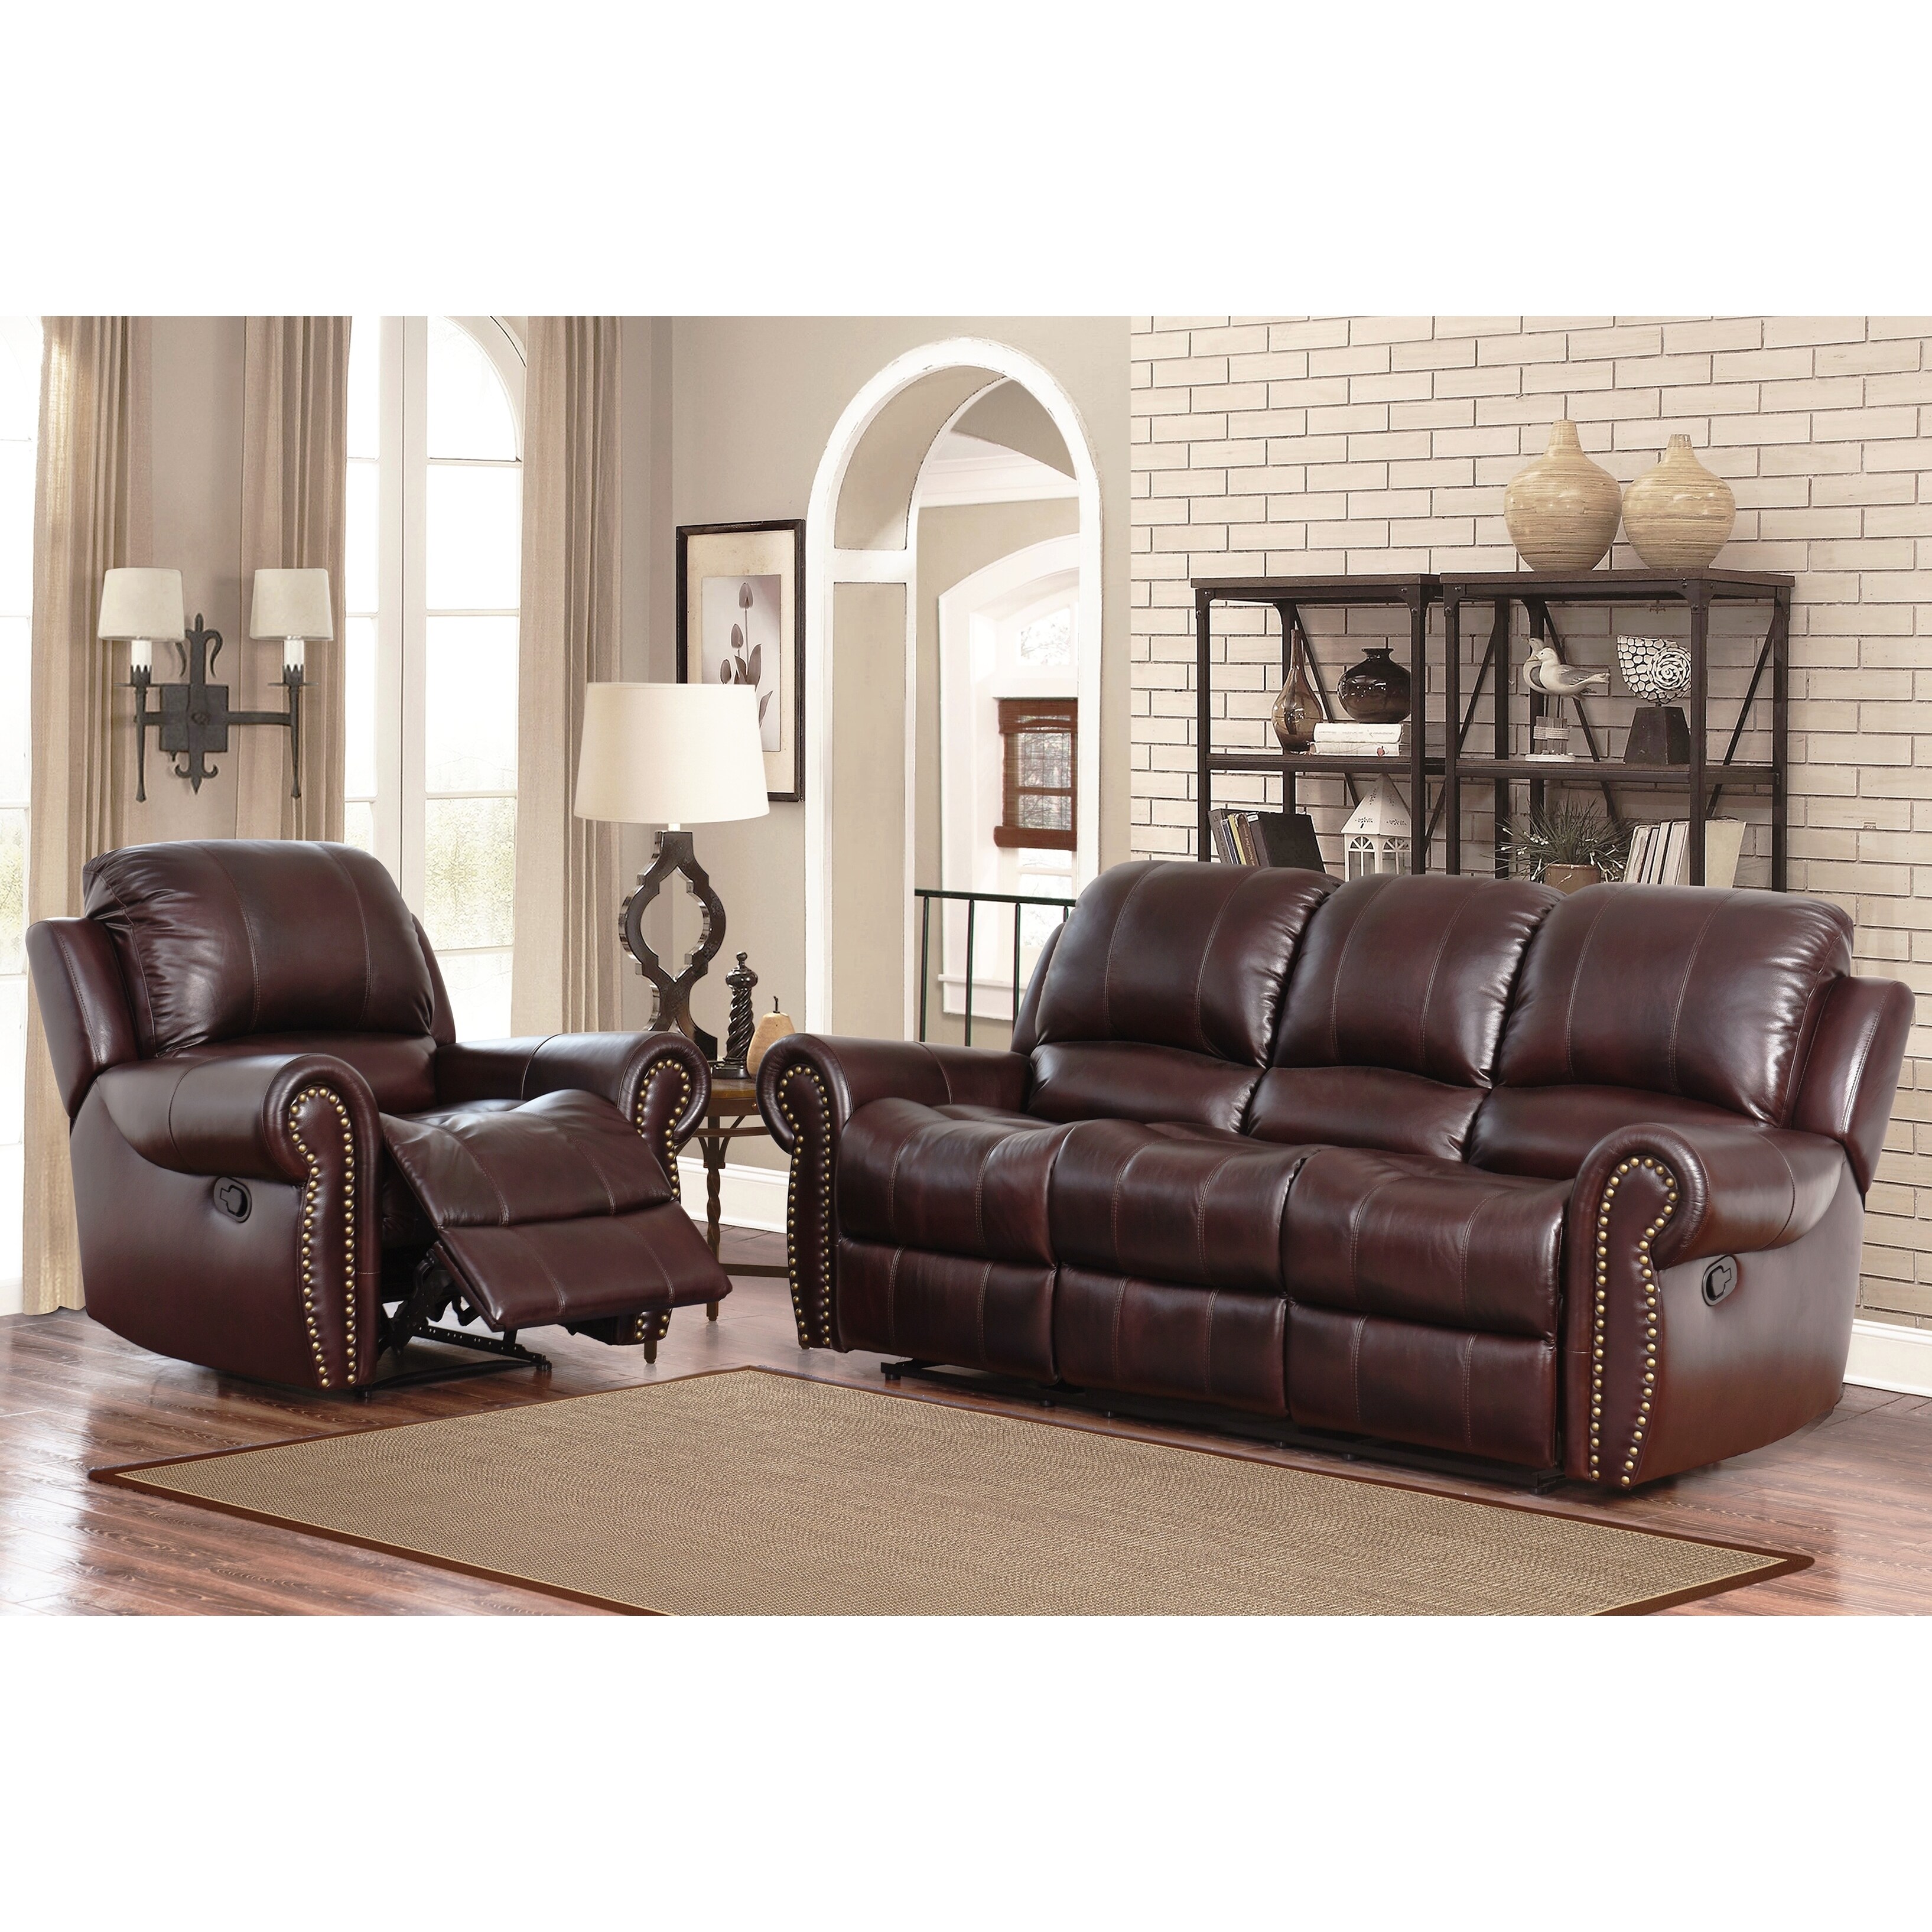 Abbyson Living Broadway Premium Top grain Leather Reclining Sofa And Armchair